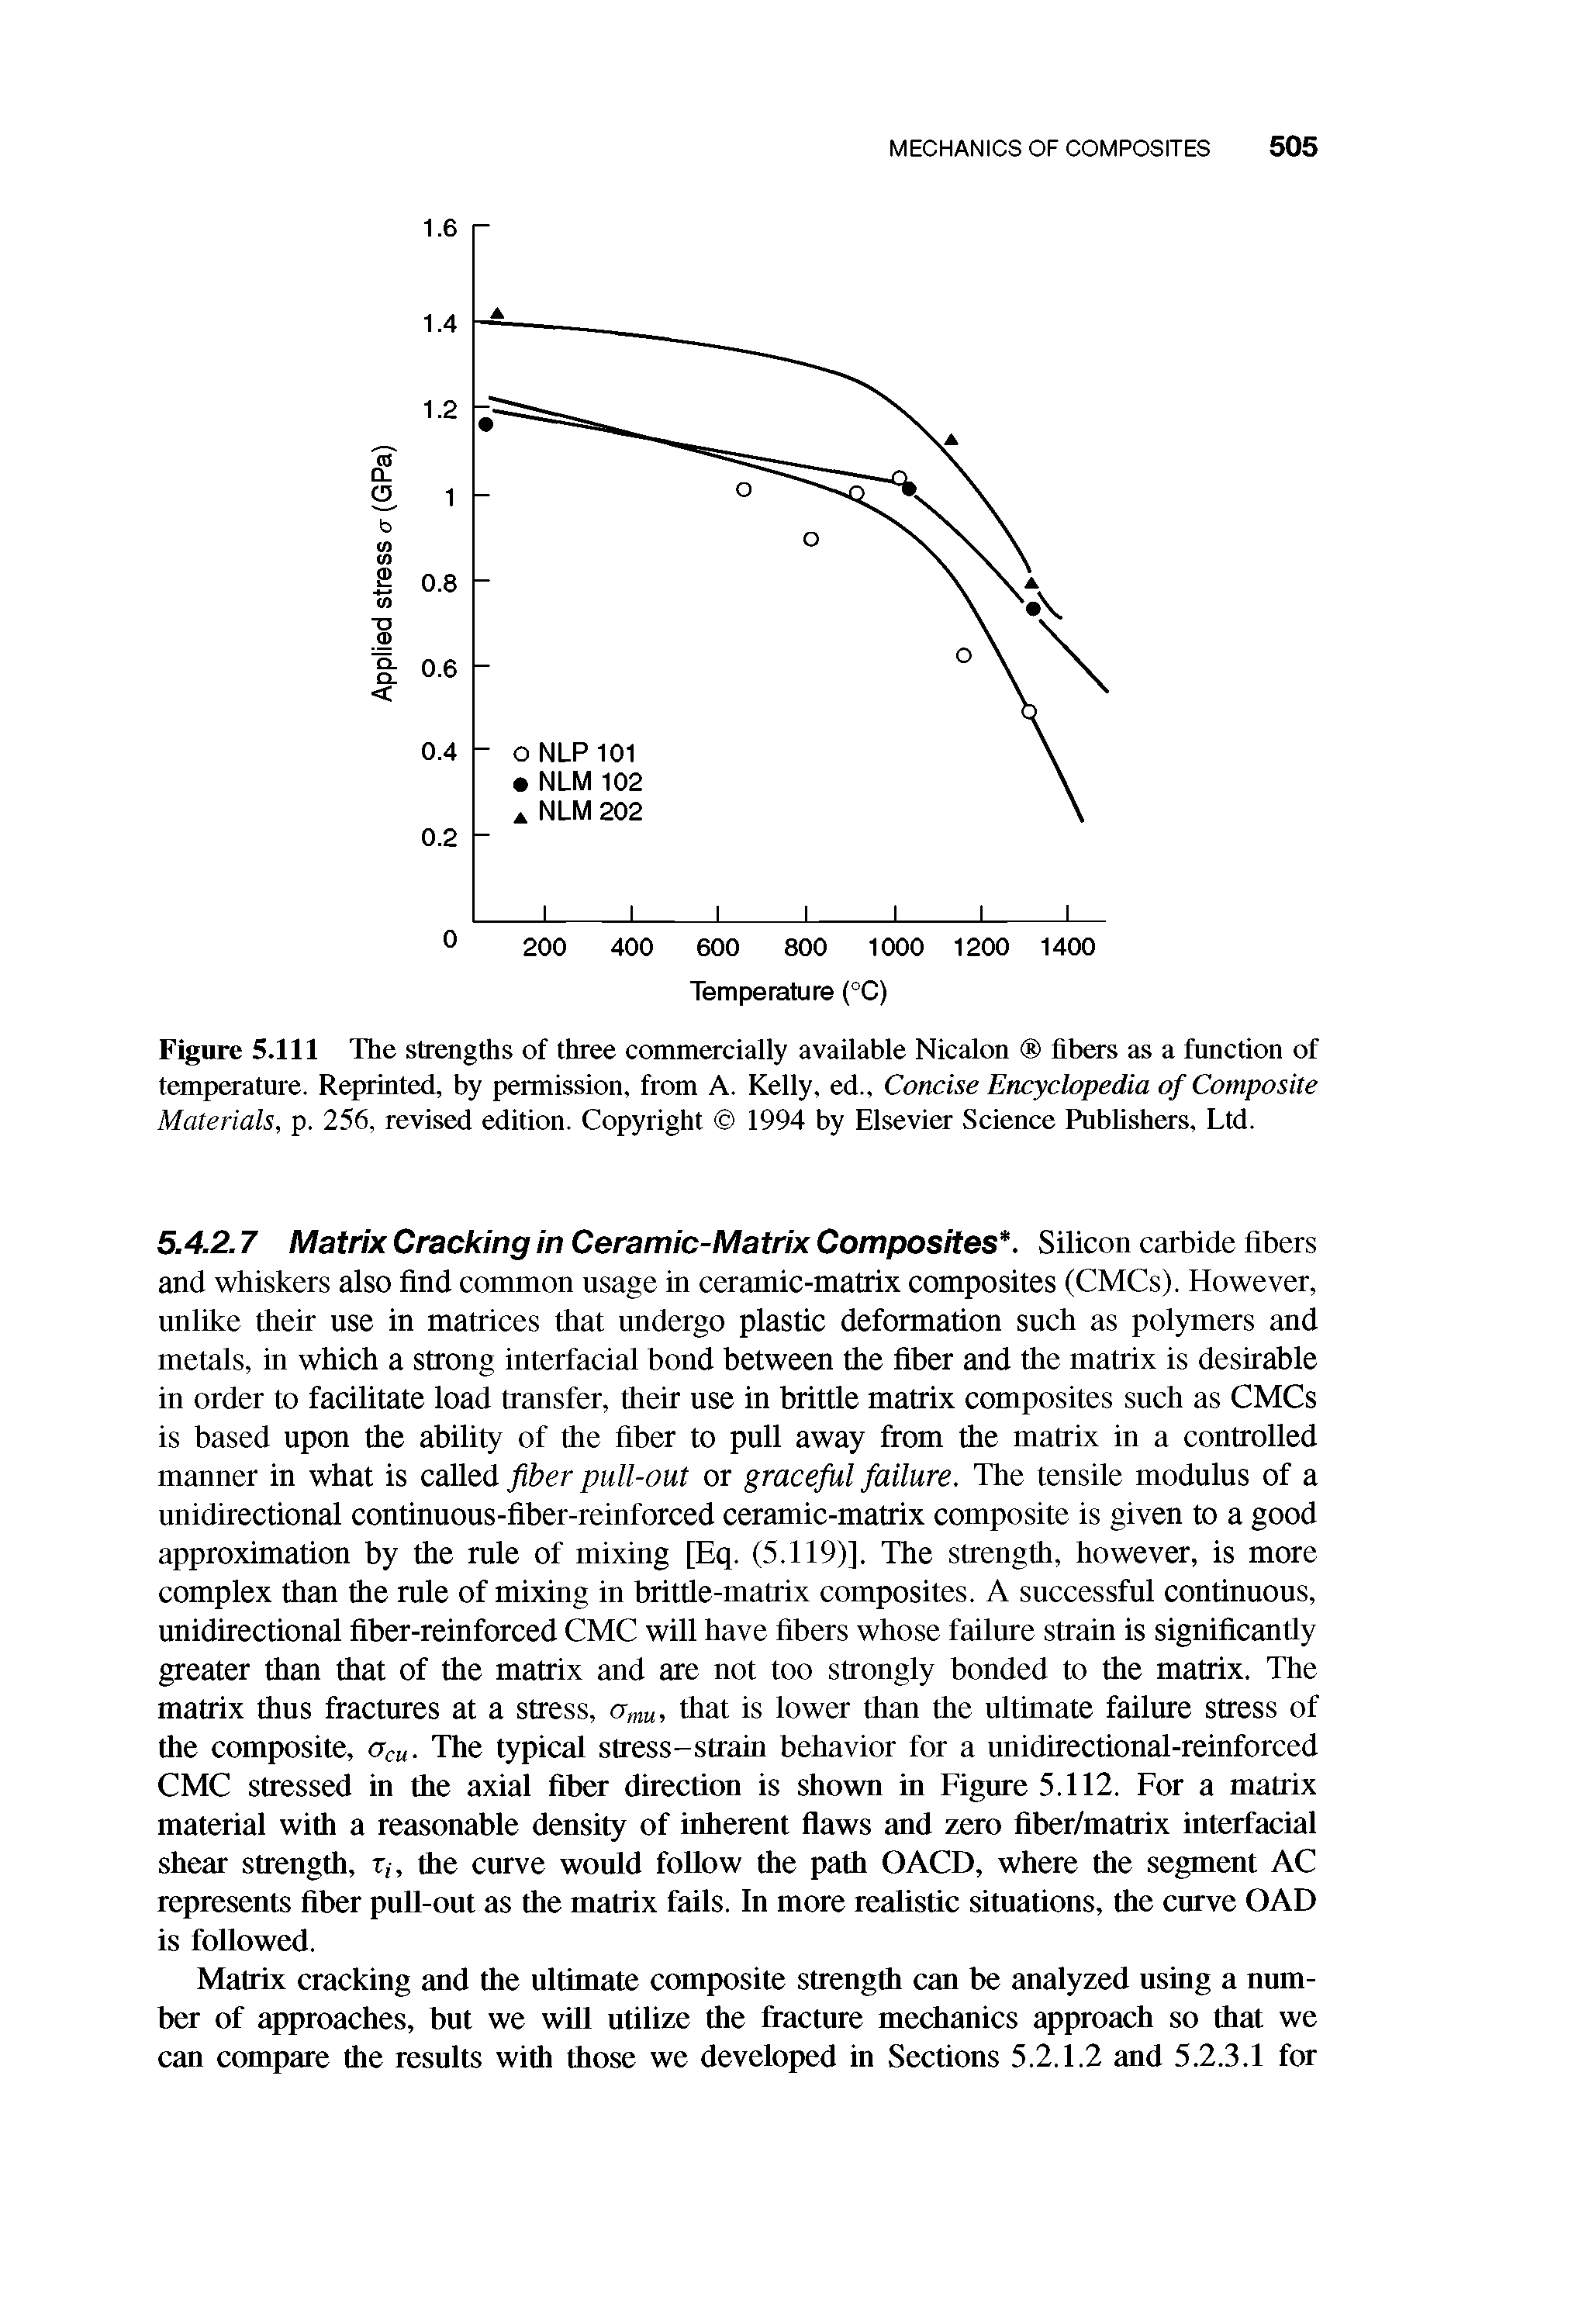 Figure 5.111 The strengths of three commercially available Nicalon fibers as a function of temperature. Reprinted, by permission, from A. Kelly, ed.. Concise Encyclopedia of Composite Materials, p. 256, revised edition. Copyright 1994 by Elsevier Science Pubhshers, Ltd.